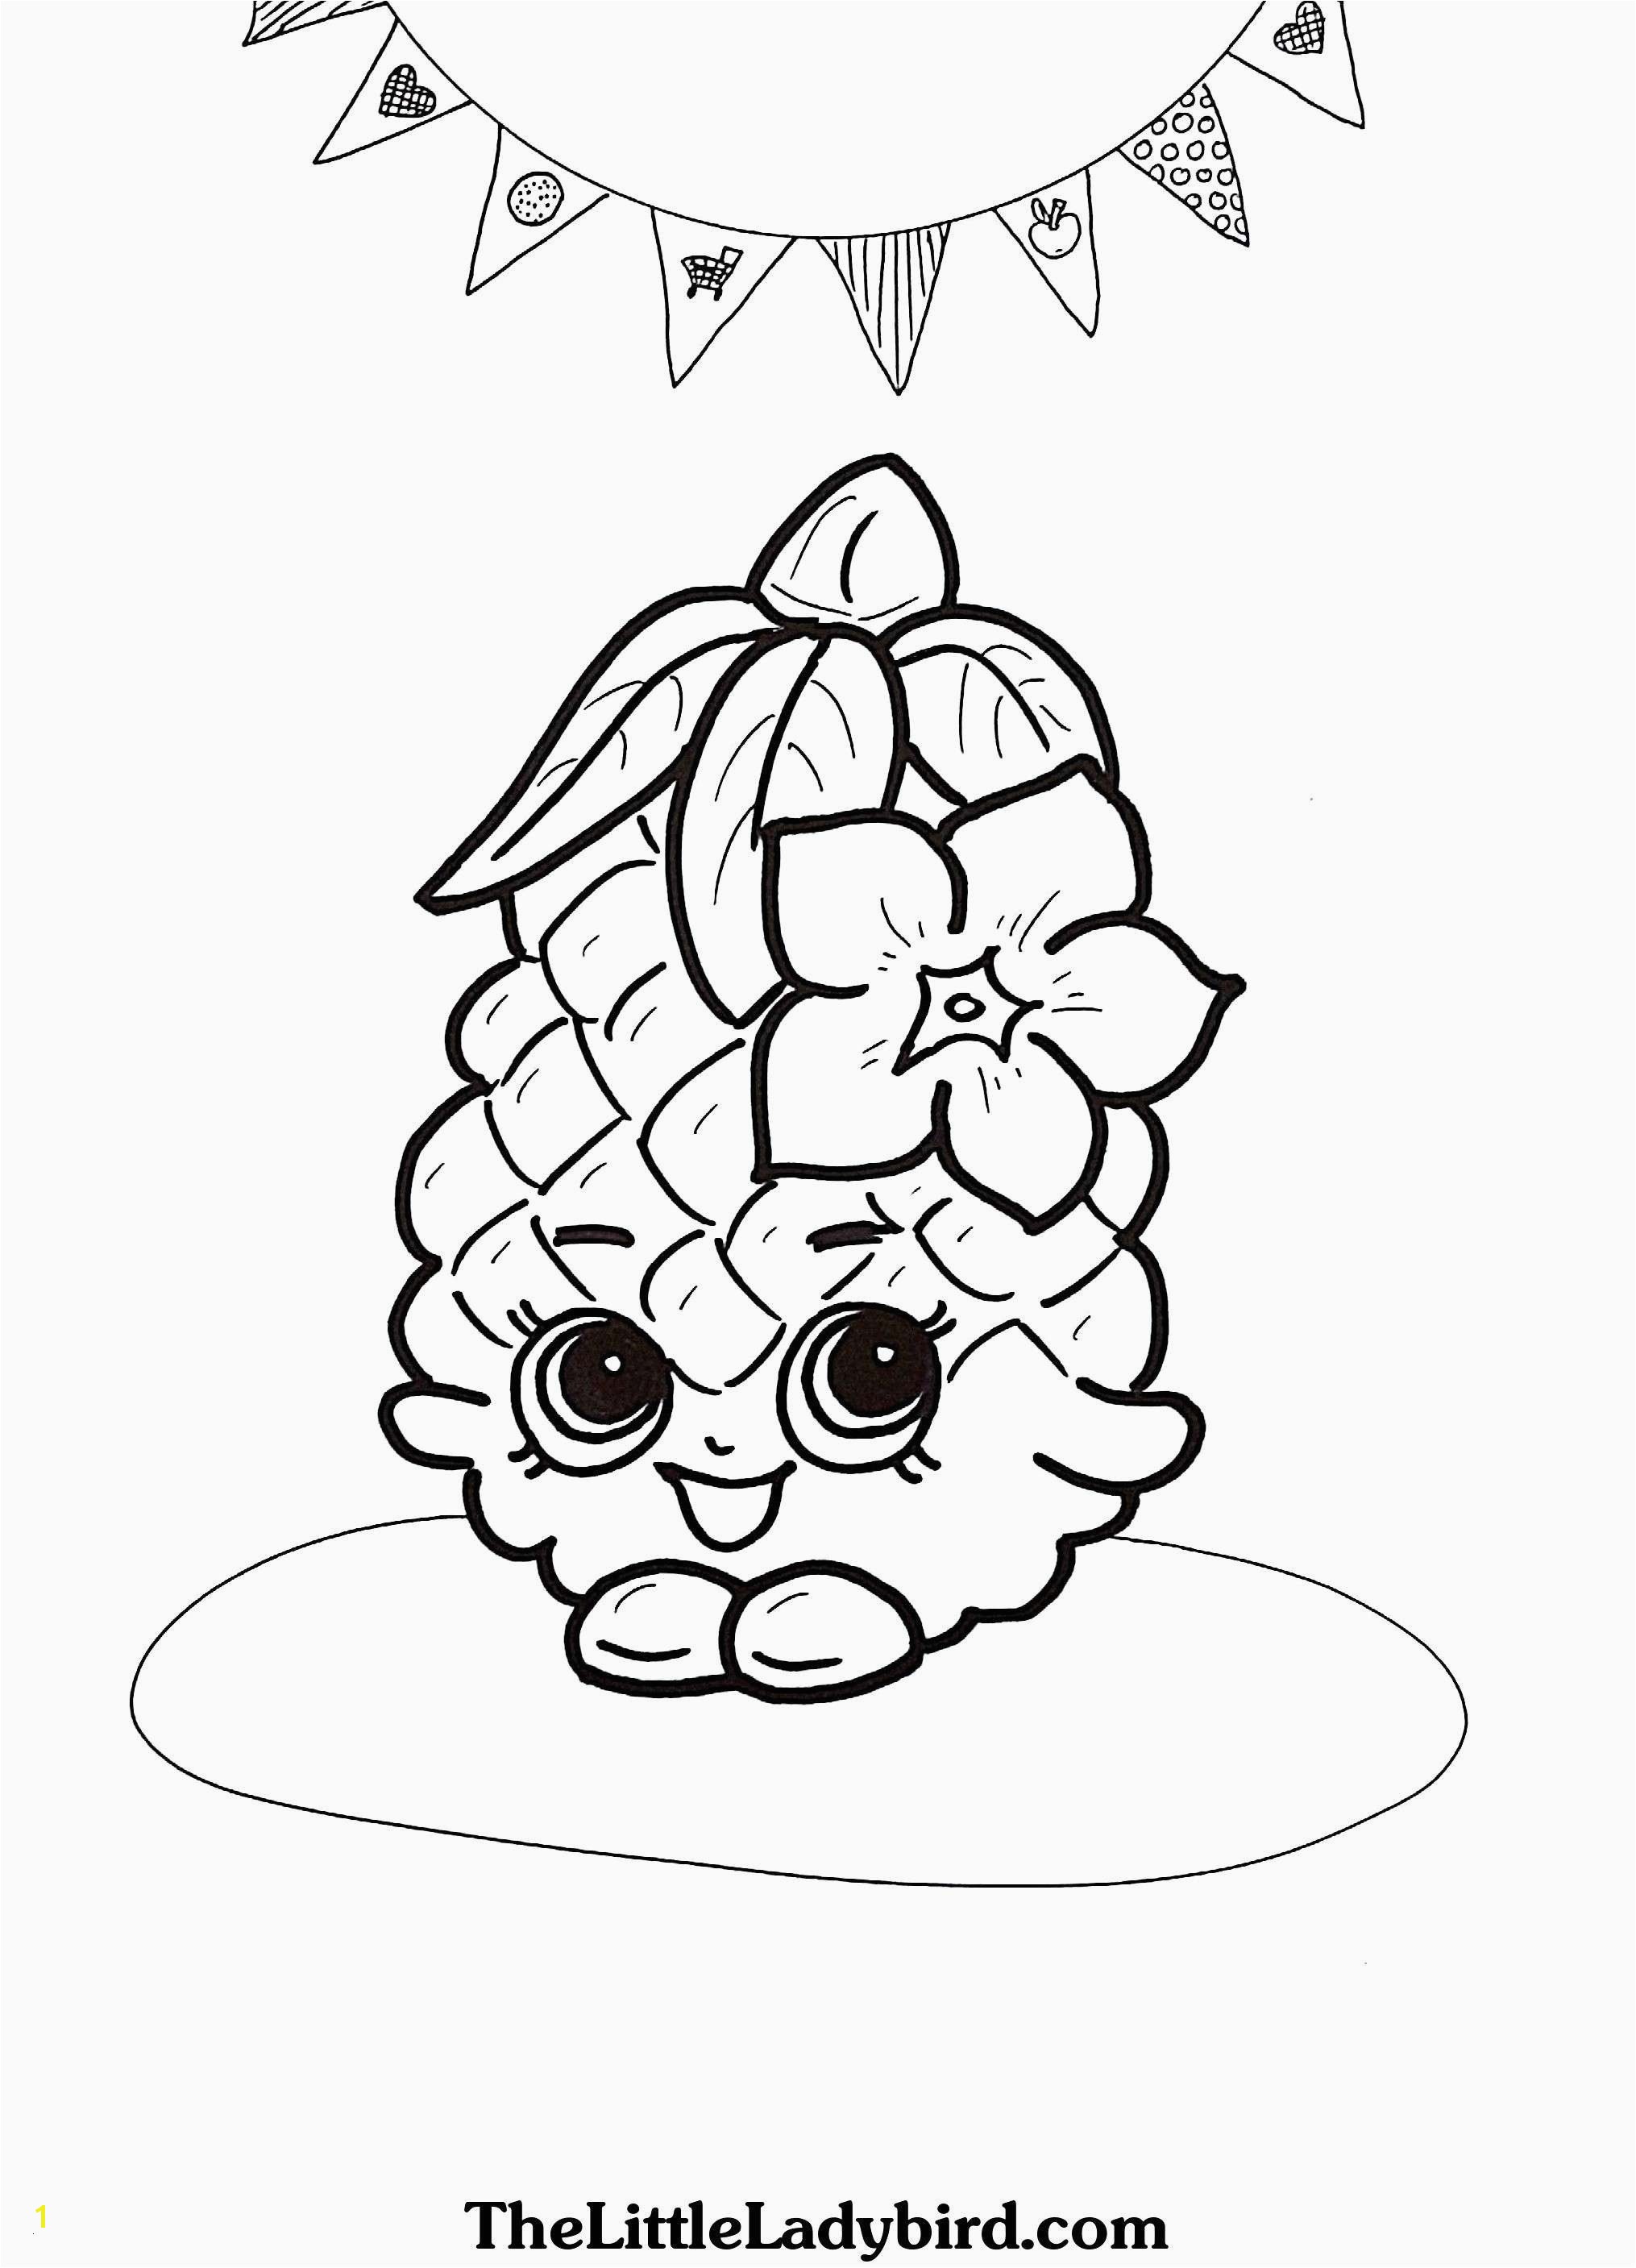 Free Printable Valentines Coloring Pages 30 New Printable Valentines Coloring Pages Alabamashrimpfestival